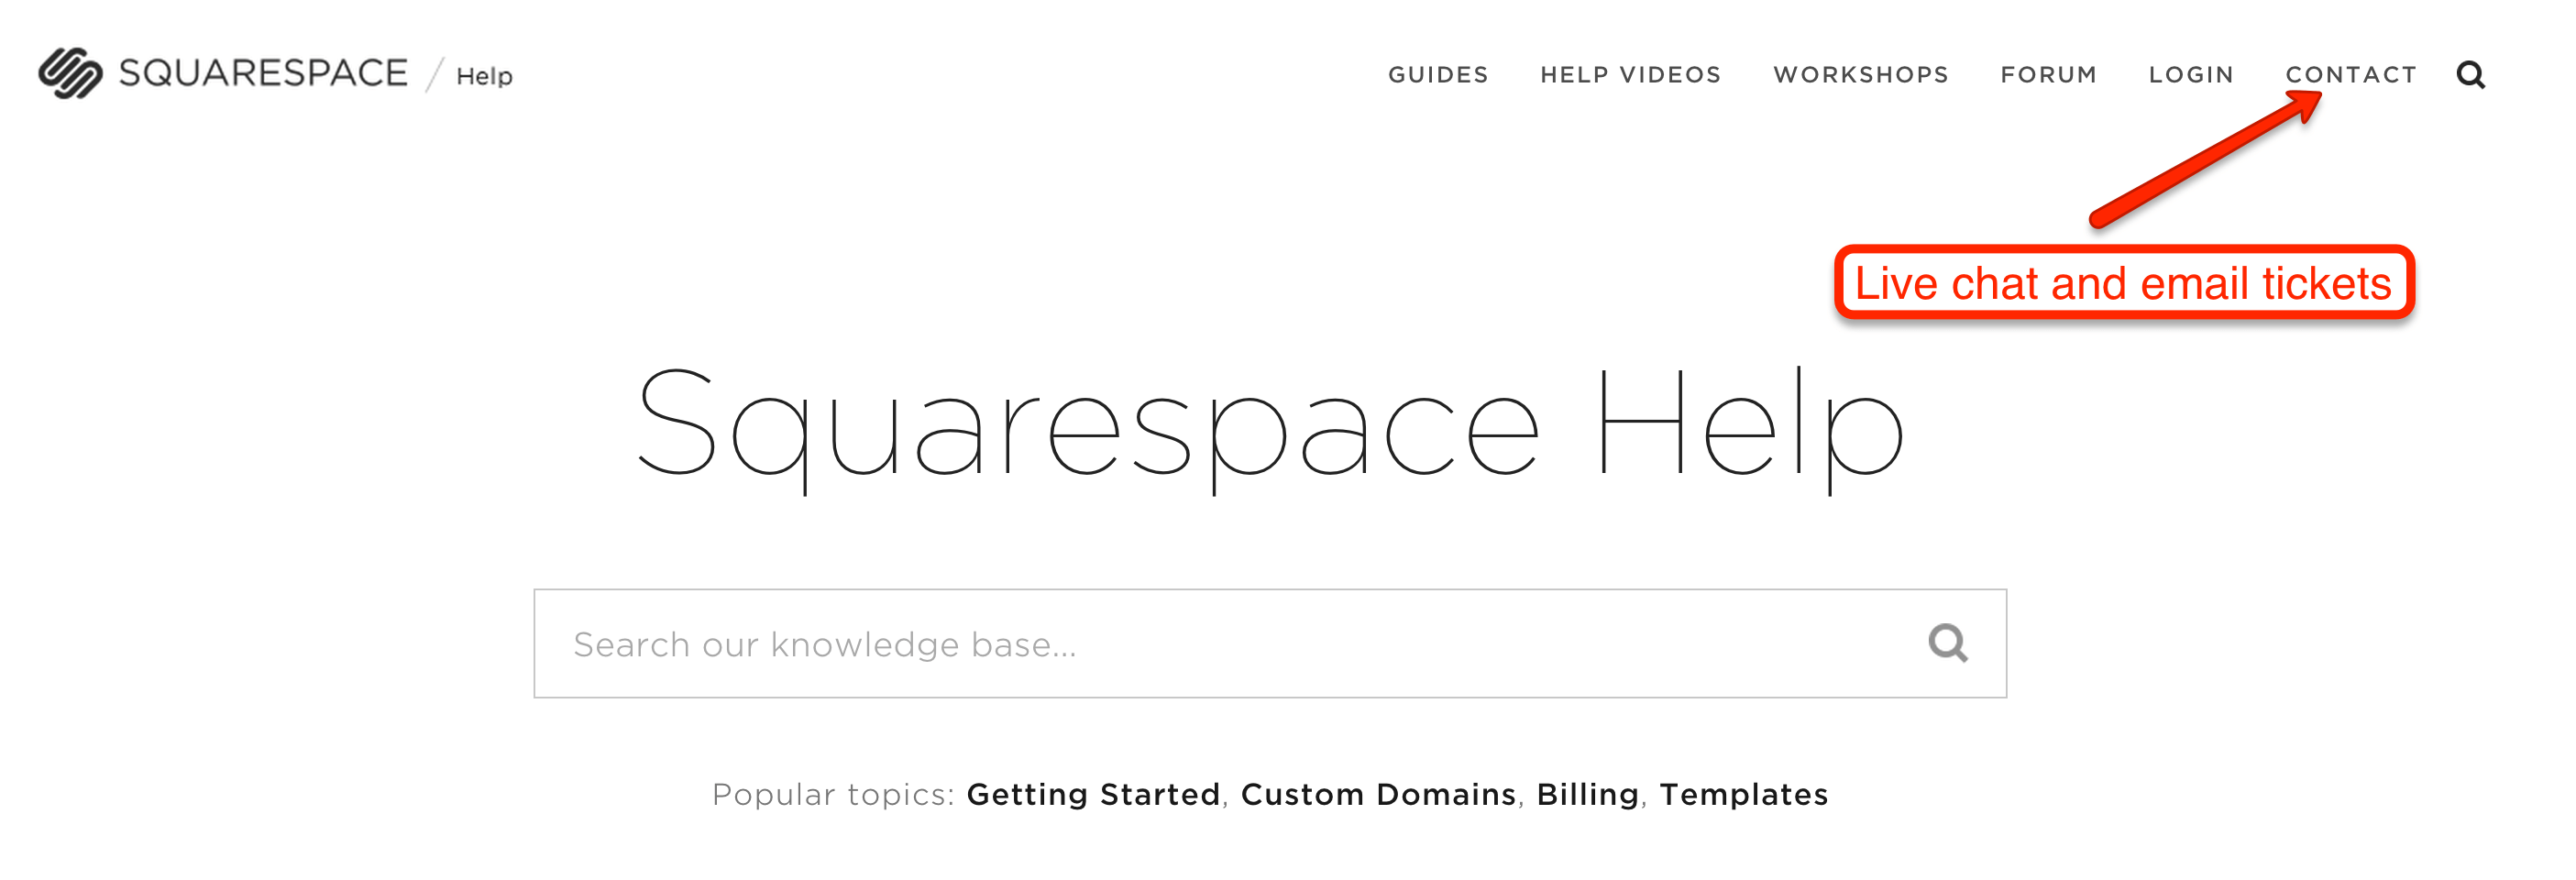 squarespace help chat